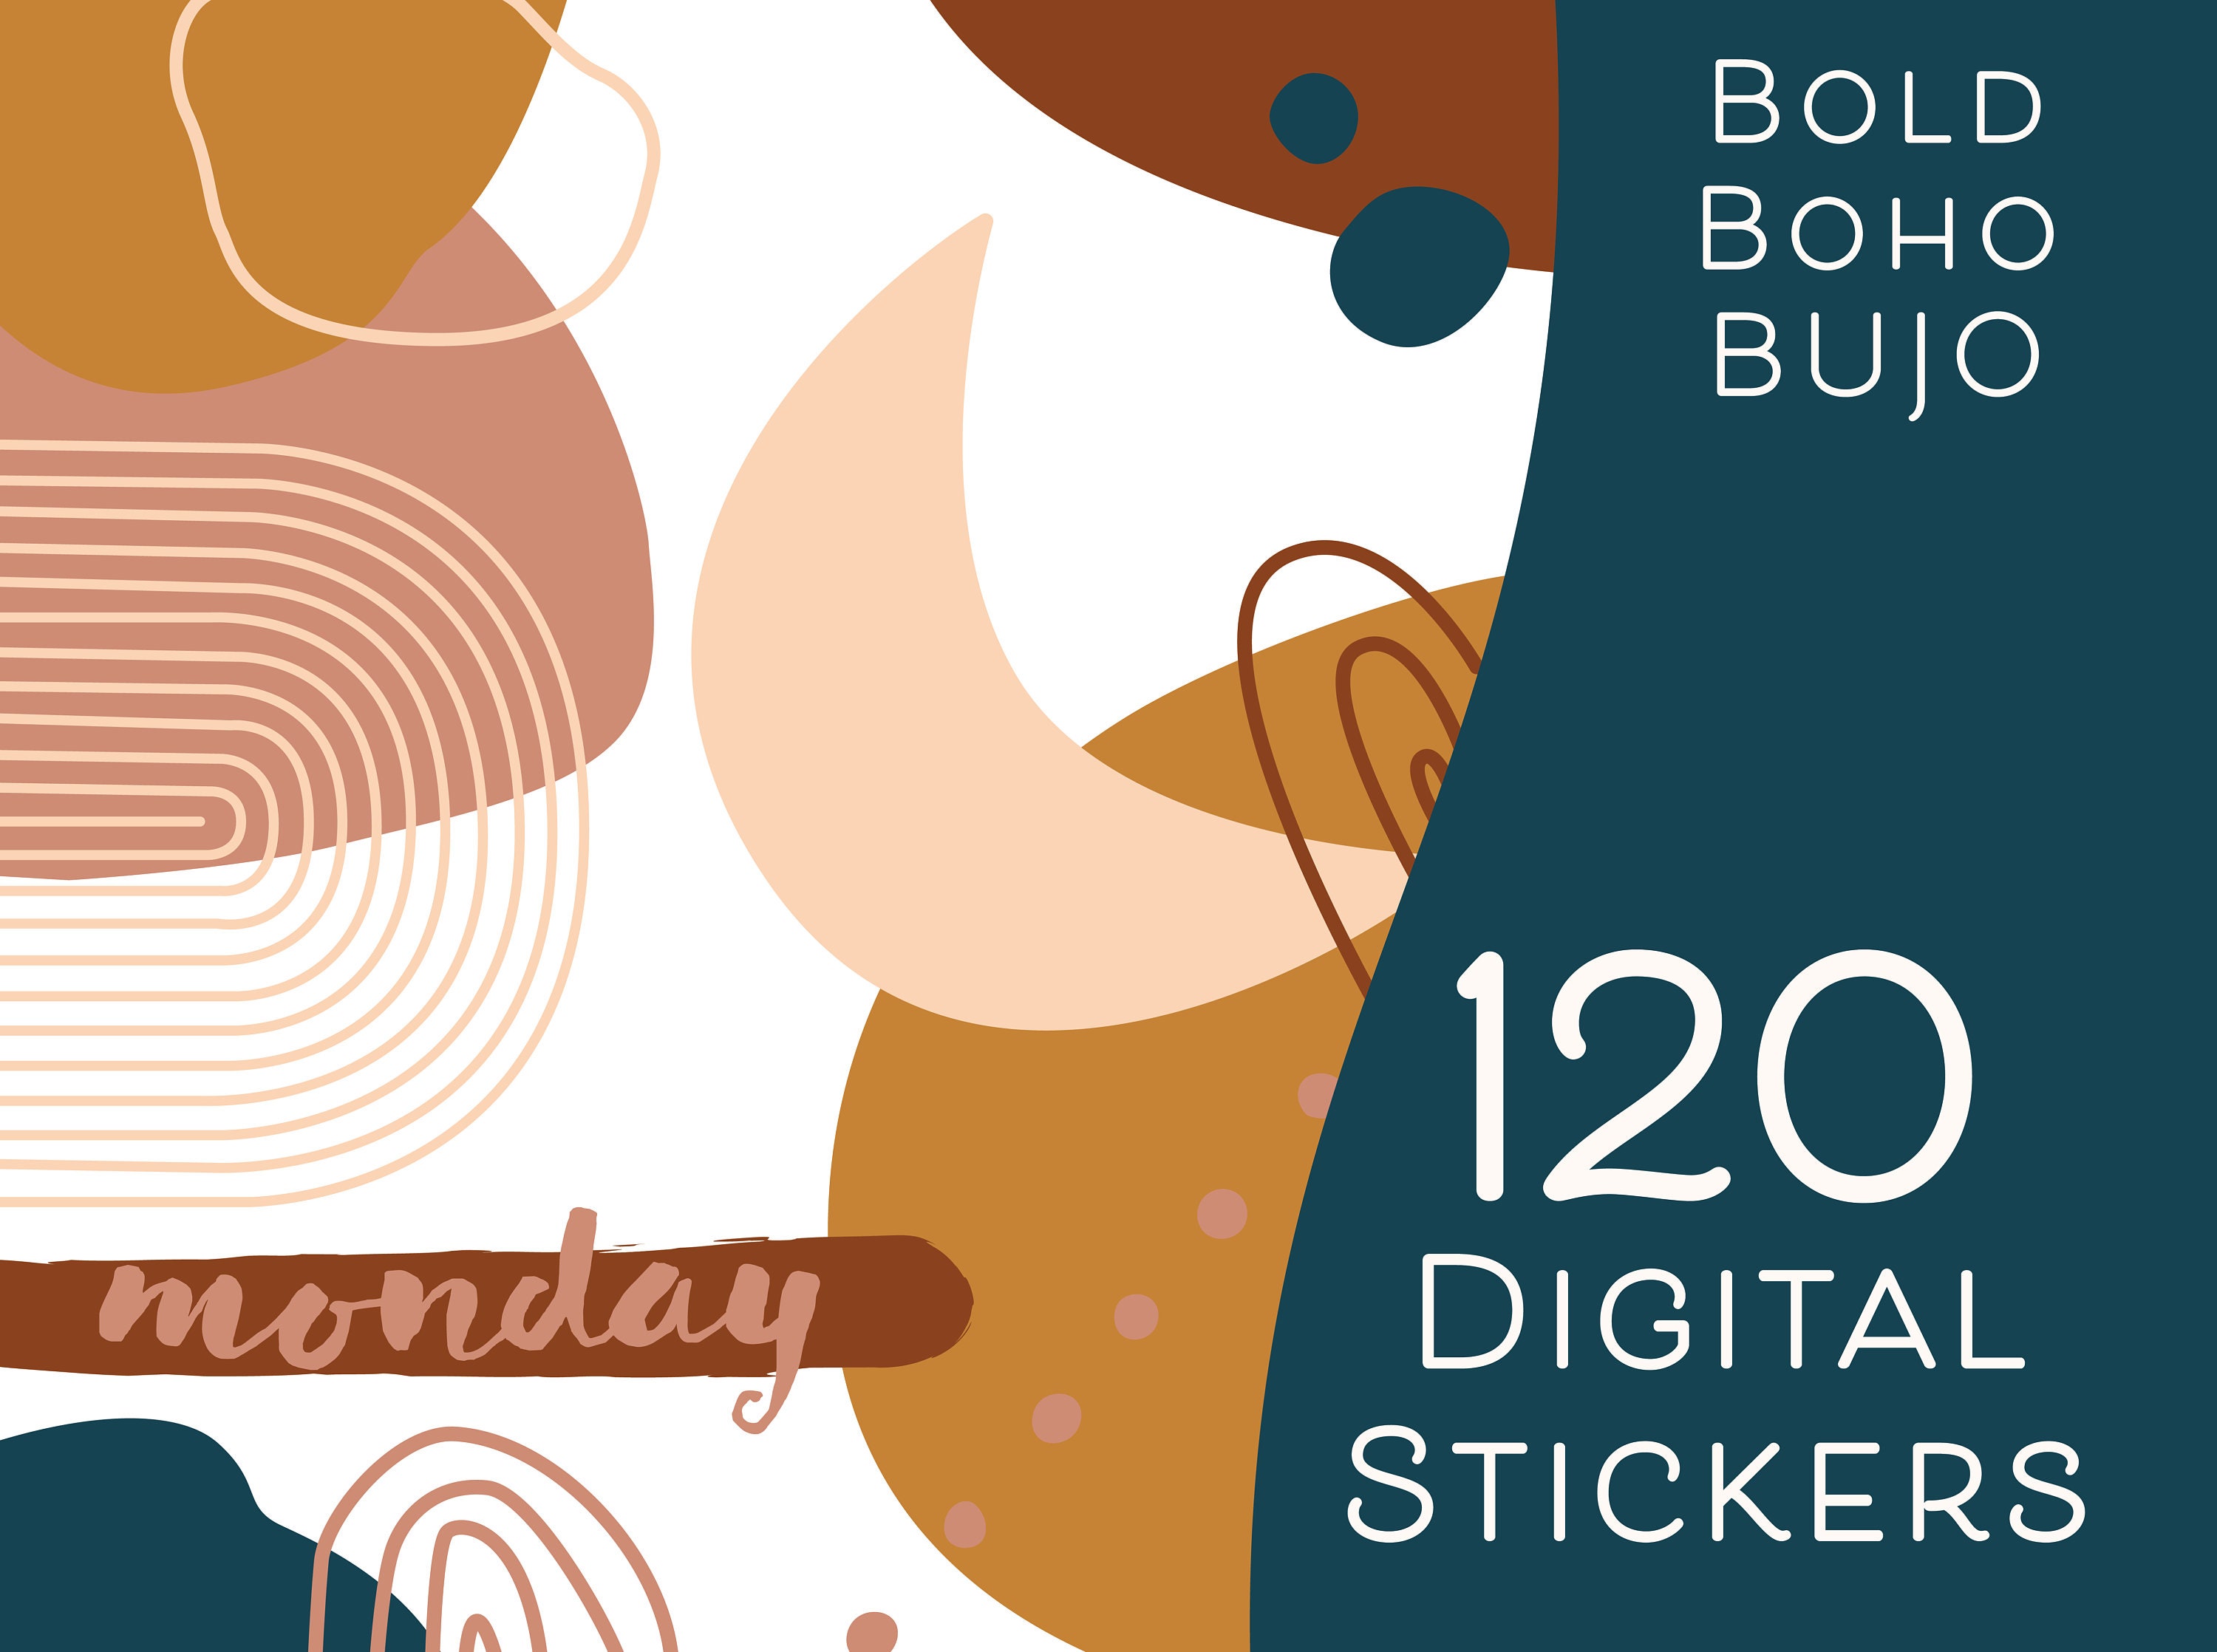 Abstract Stickers, Bullet Journal Stickers, Planner Stickers, Bujo  Stickers, Bullet Journal DIY, Decorative Stickers, Planner Stickers